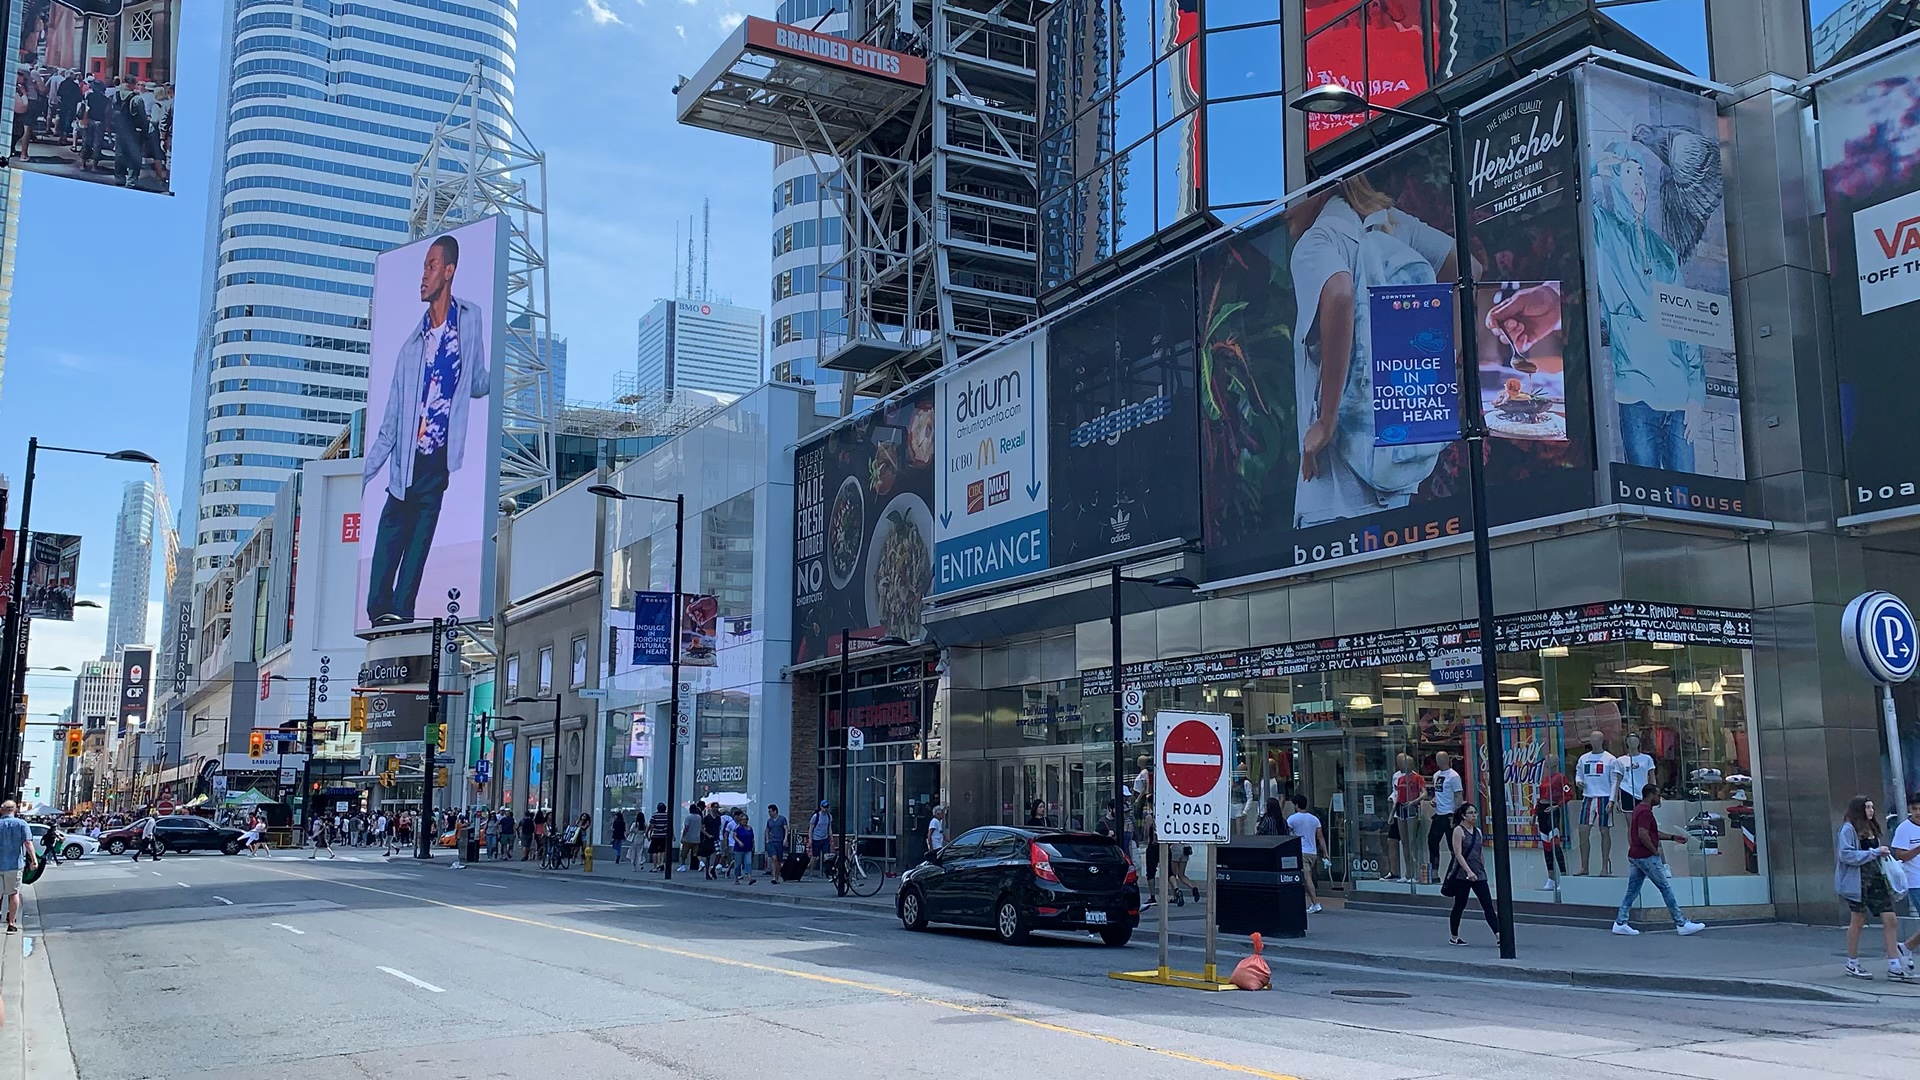 Photo of Yonge and Dundas in Toronto with large billboards people walking on street.